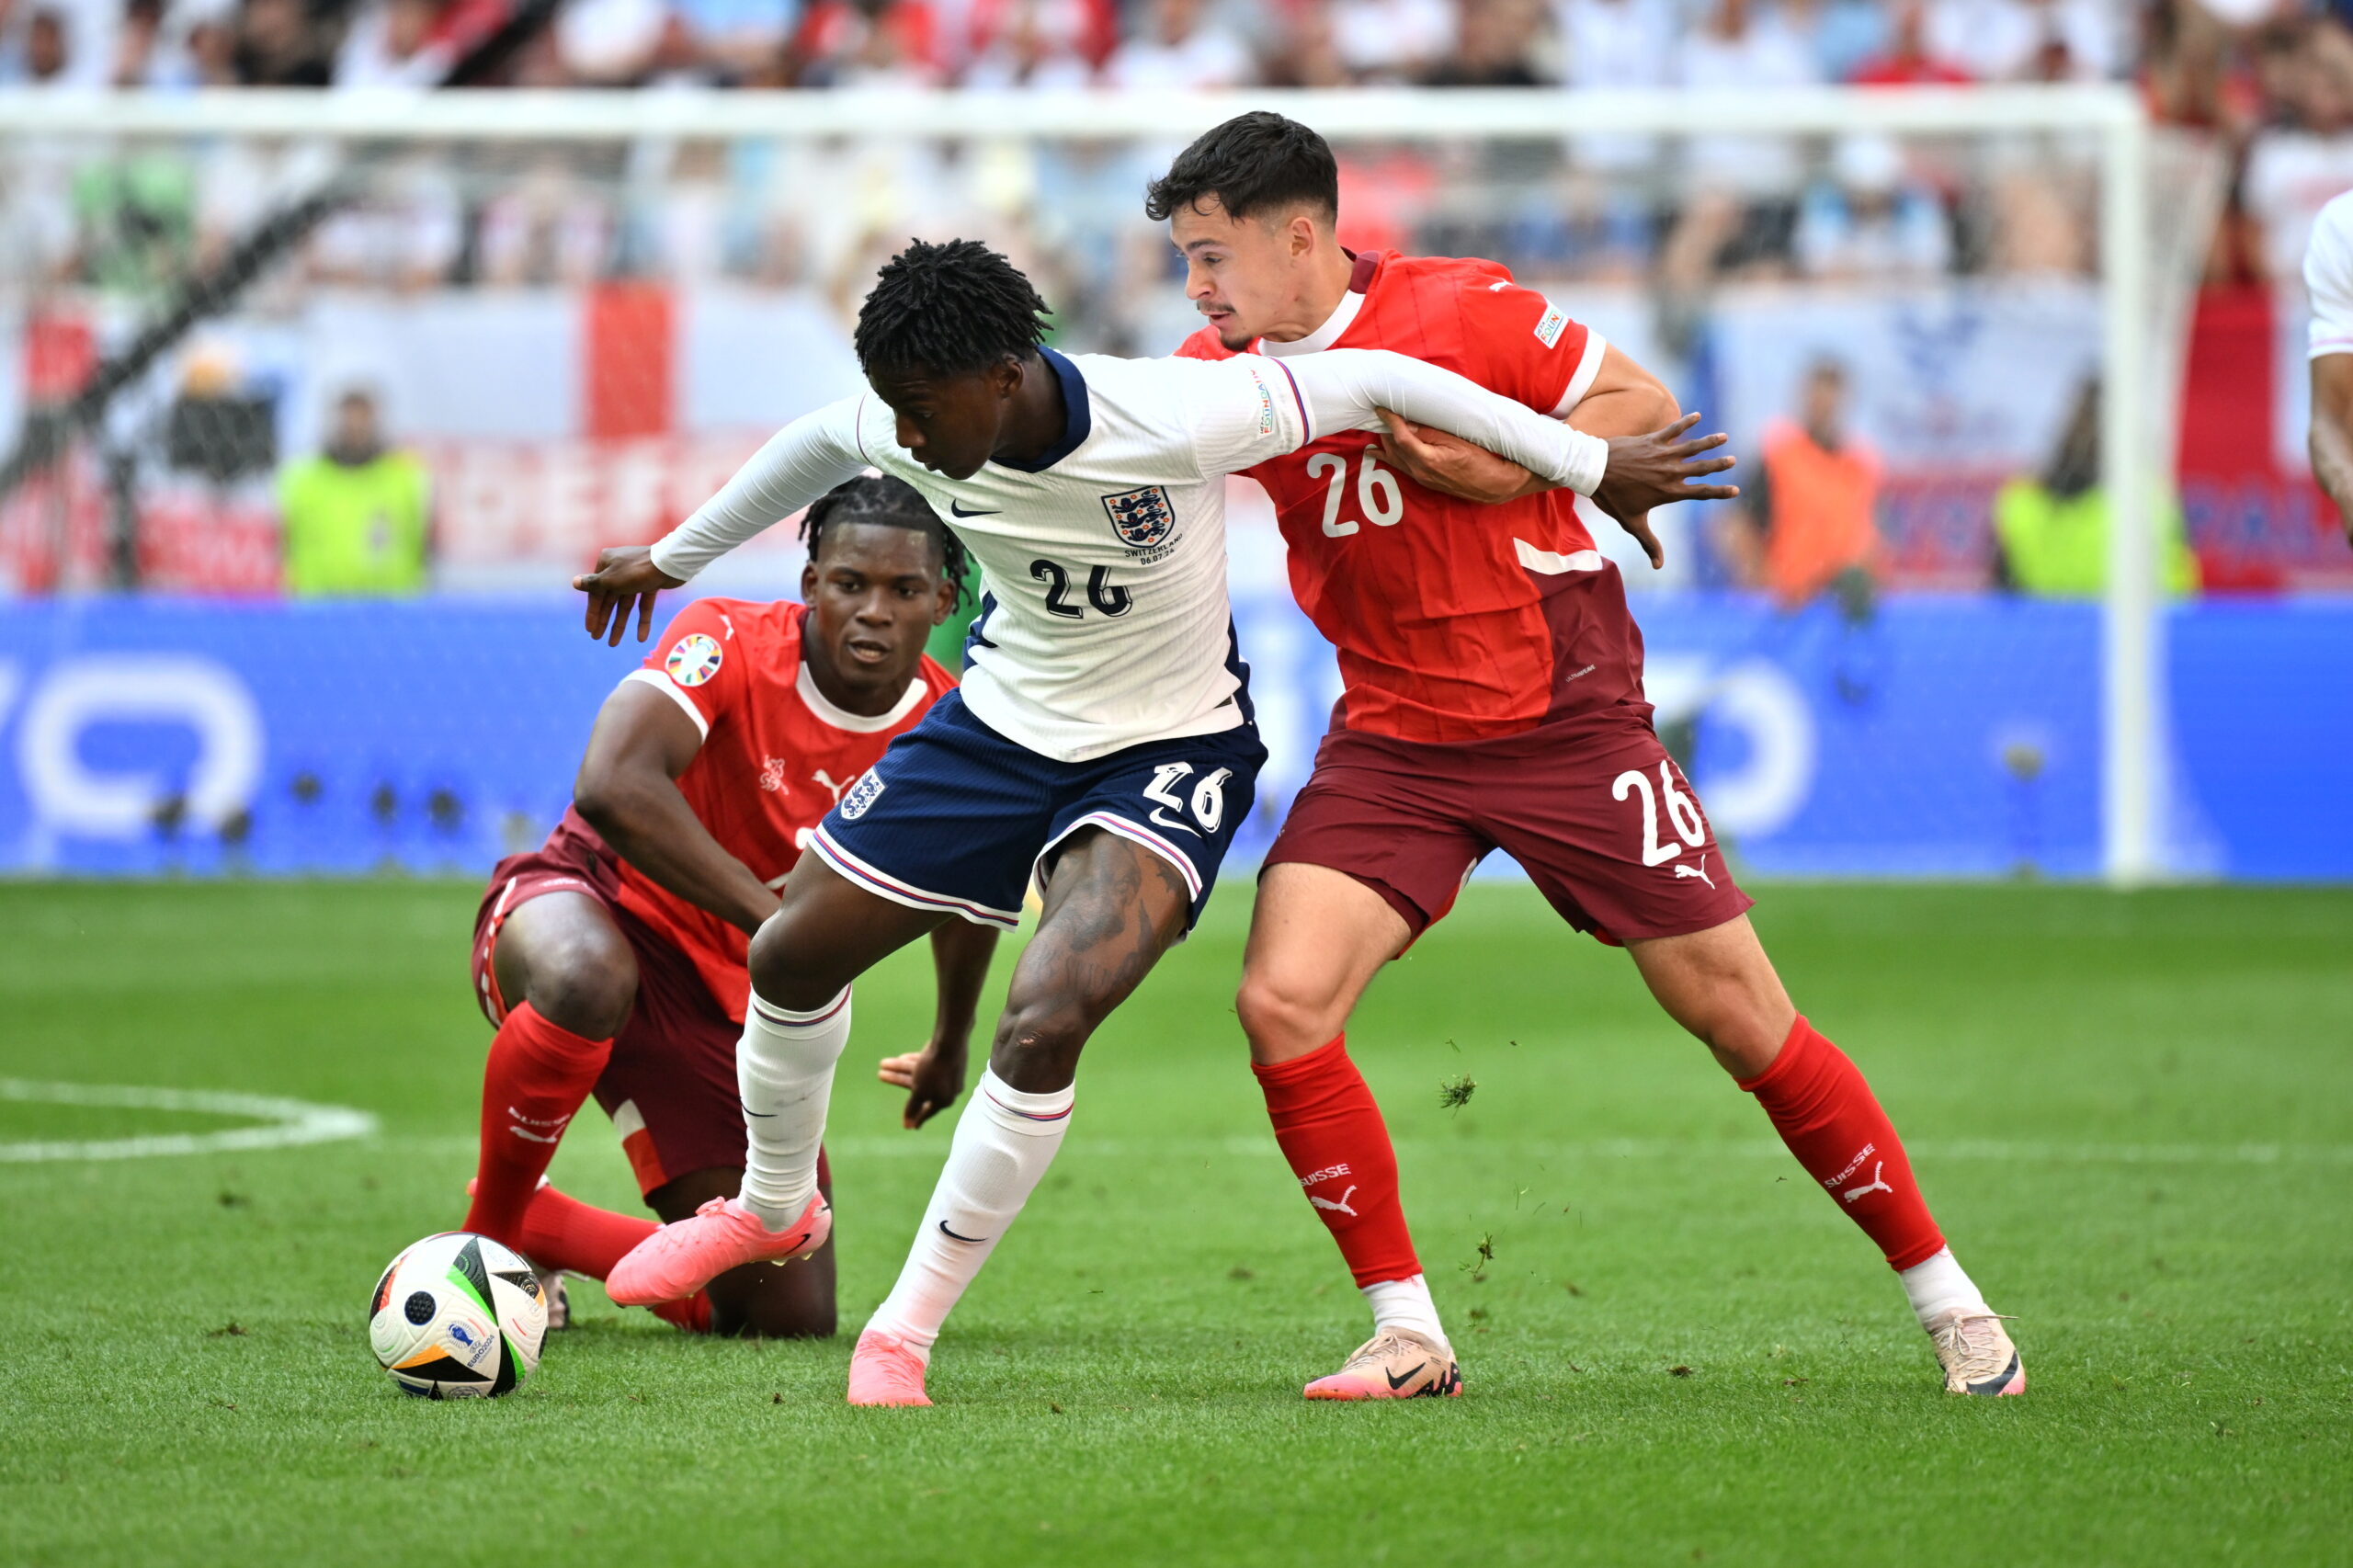 DUSSELDORF, GERMANY - JULY 06: England's Kobbie Mainoo, Central Midfield fights for the ball during the UEFA Euro 2024 quarter-final football match between England and Switzerland at the Duesseldorf Arena in Duesseldorf on July 6, 2024. (Photo by Gokhan Balci/Anadolu via Getty Images)